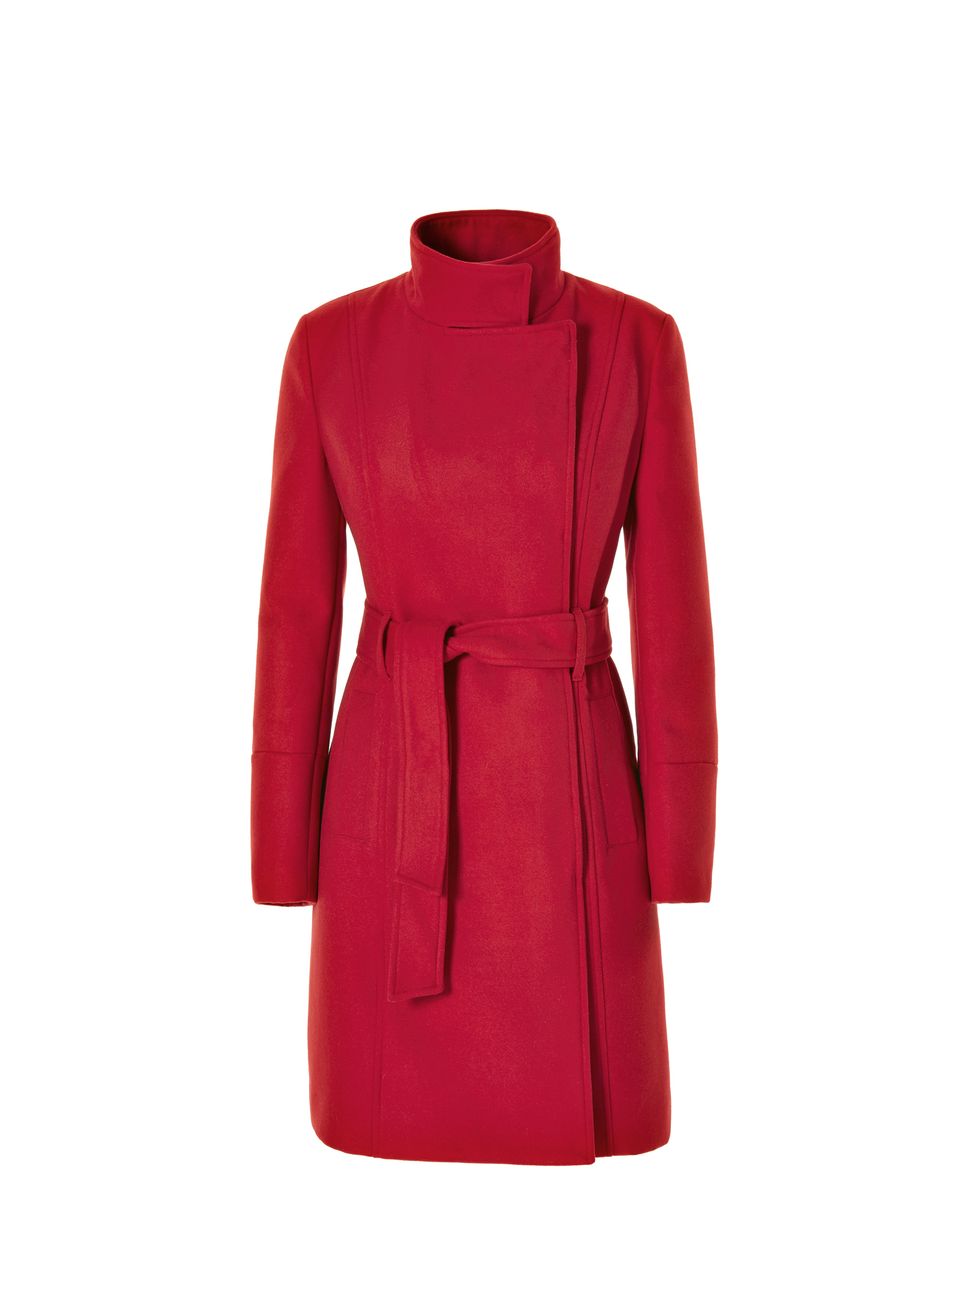 Clothing, Coat, Trench coat, Outerwear, Red, Sleeve, Overcoat, Dress, Robe, Collar, 